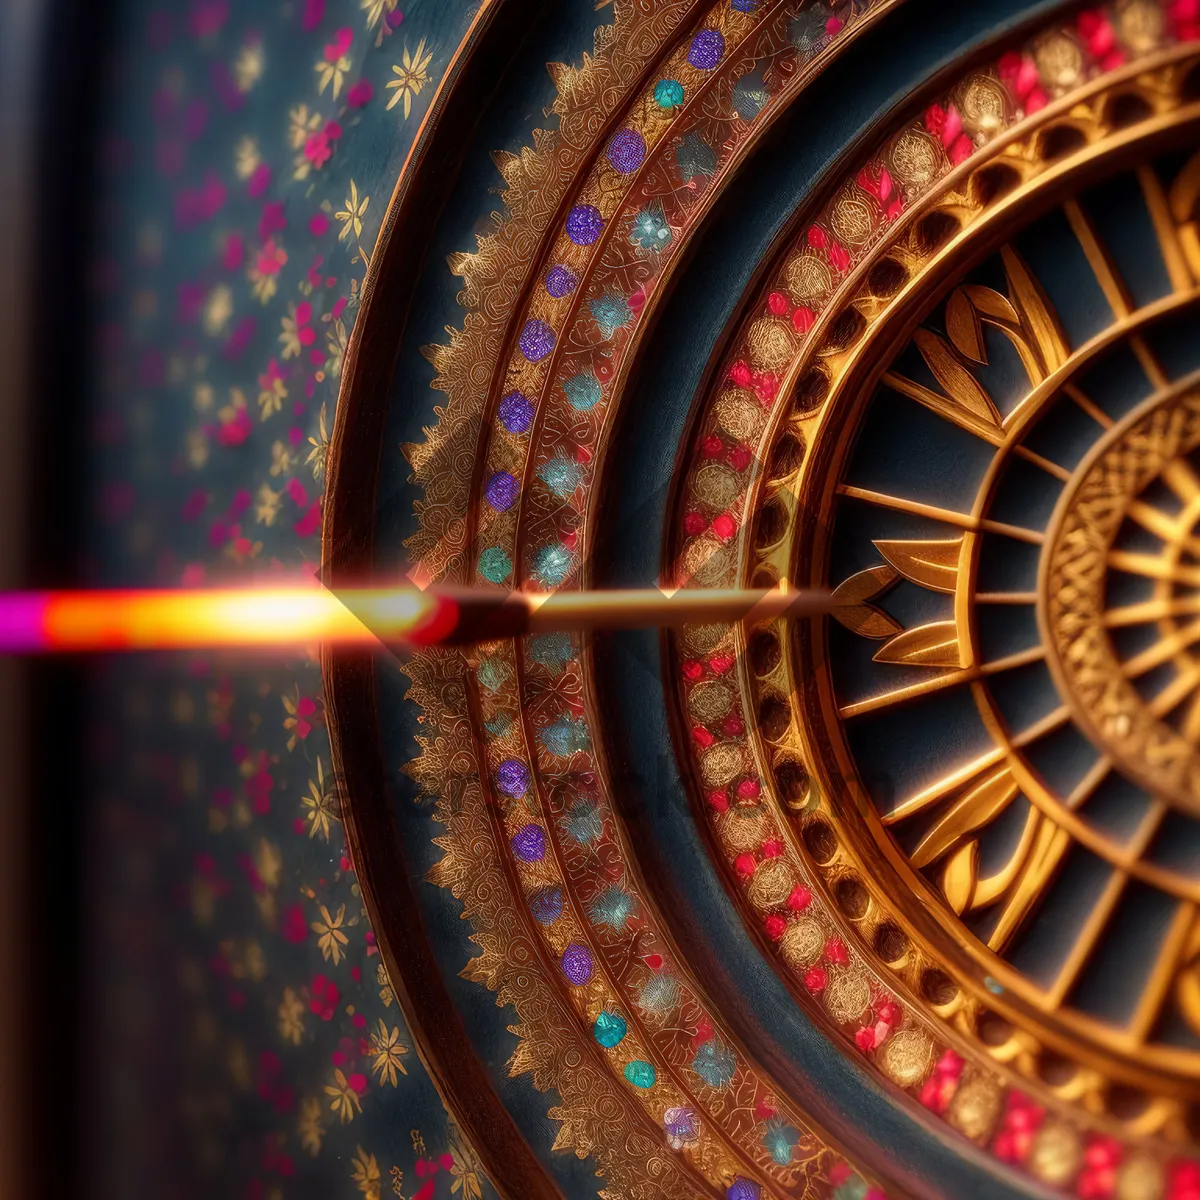 Picture of Digital Roulette Wheel - Artistic, Technological Design with Light Patterns